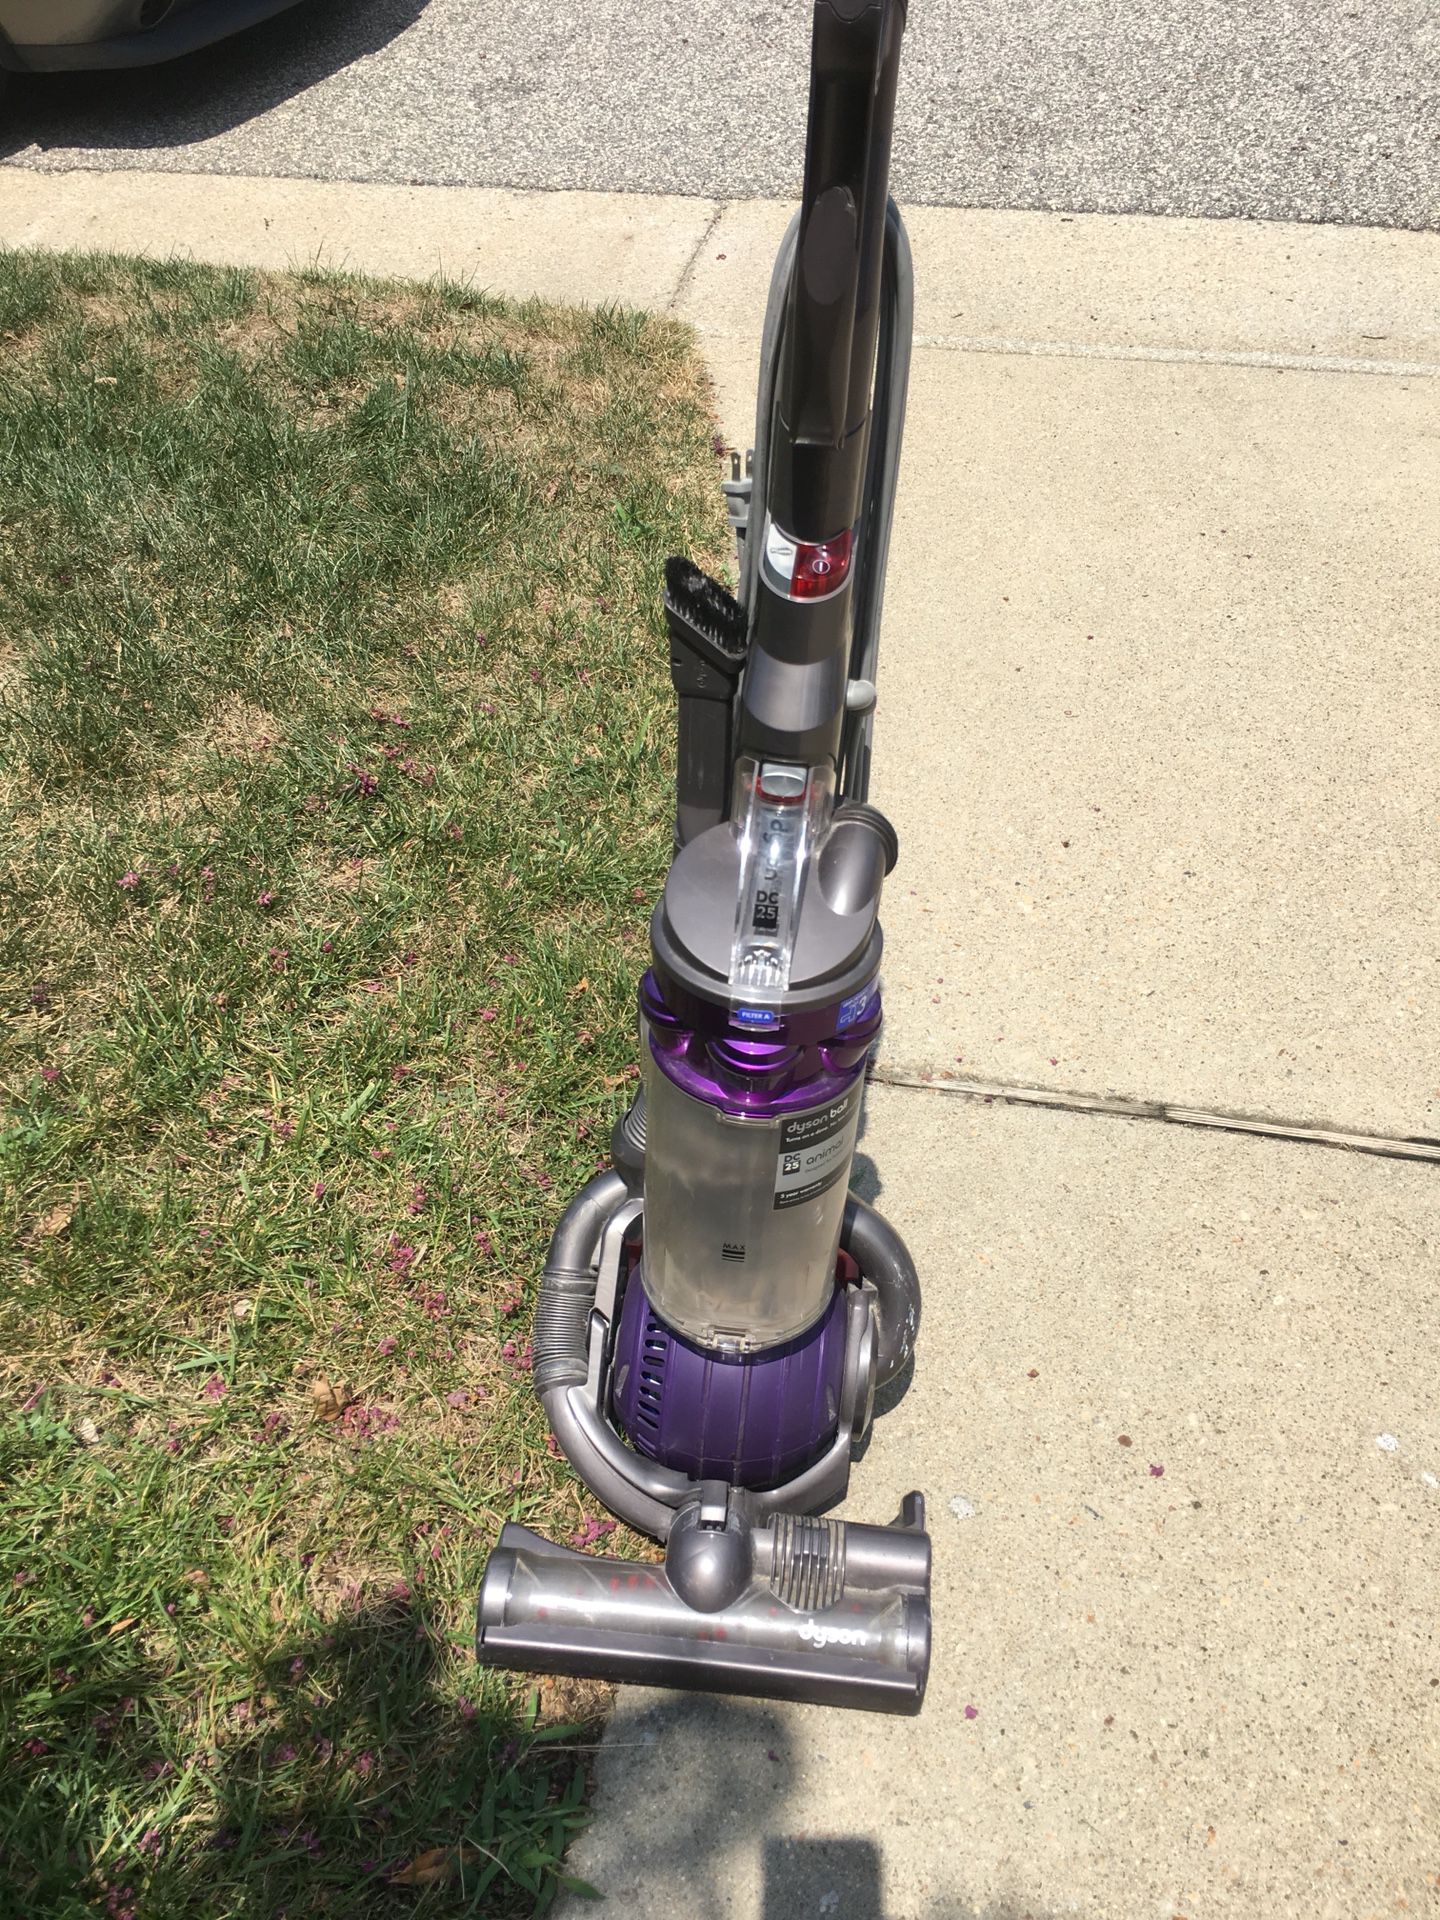 $400 Dyson Ball Vacuum for $45